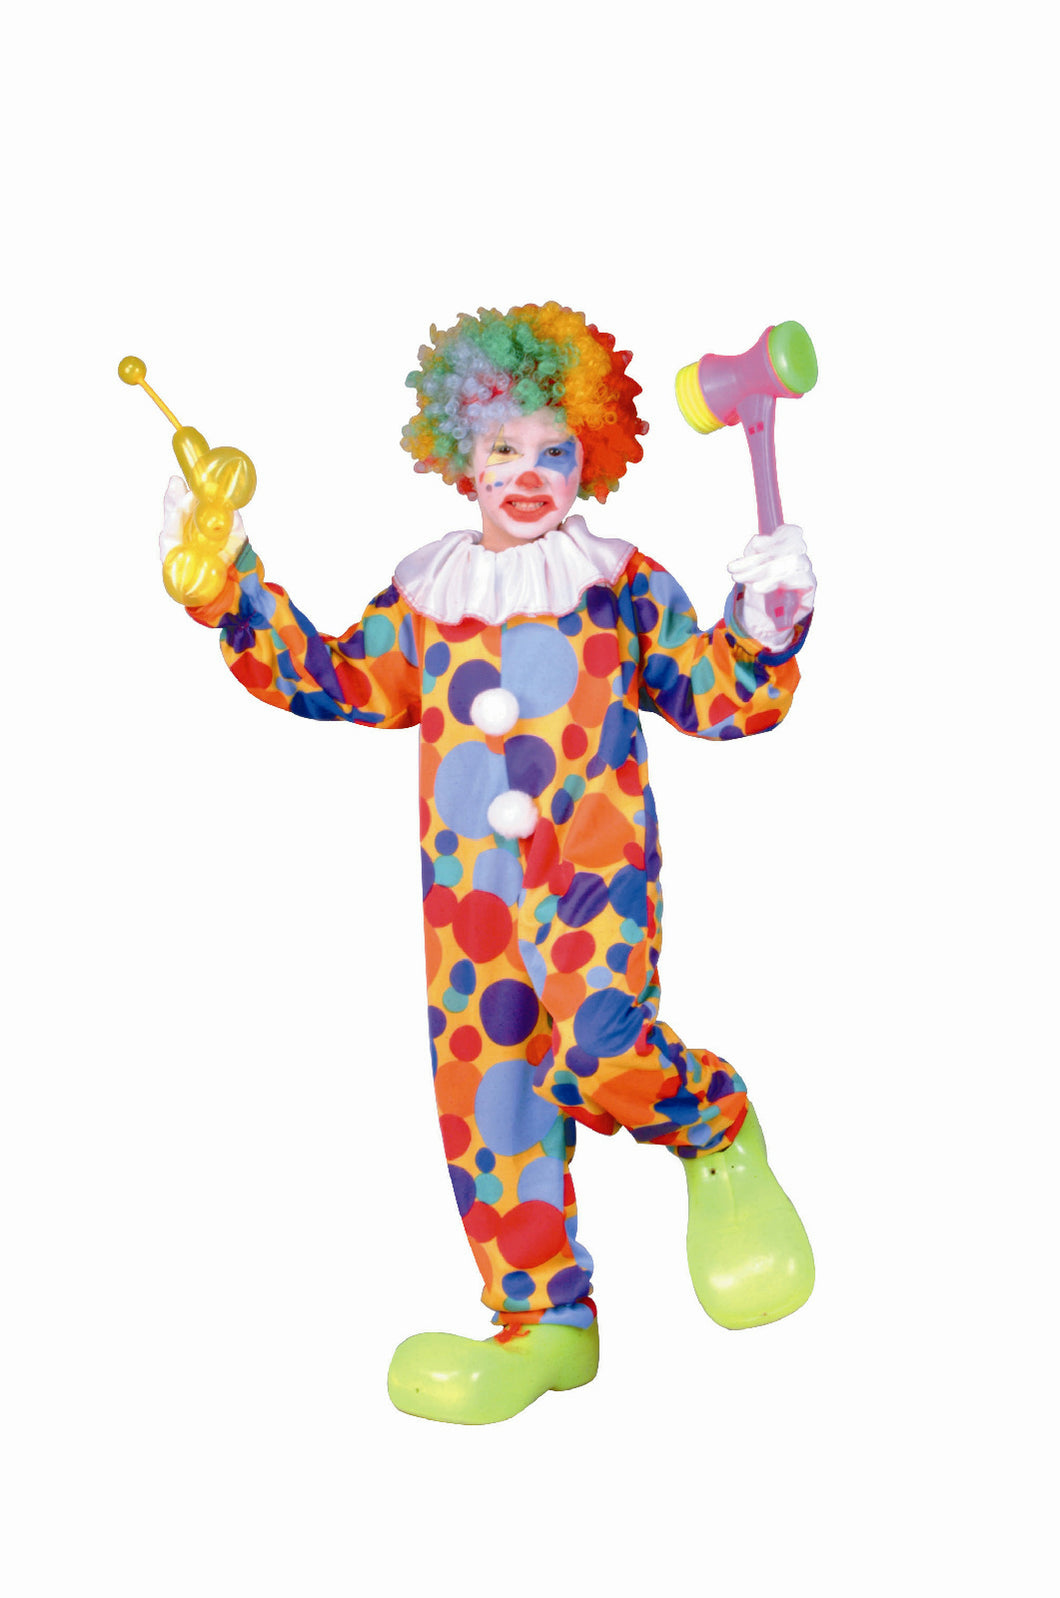 RG Costumes Polka Dots Clown Child Costume Size Small 4-6